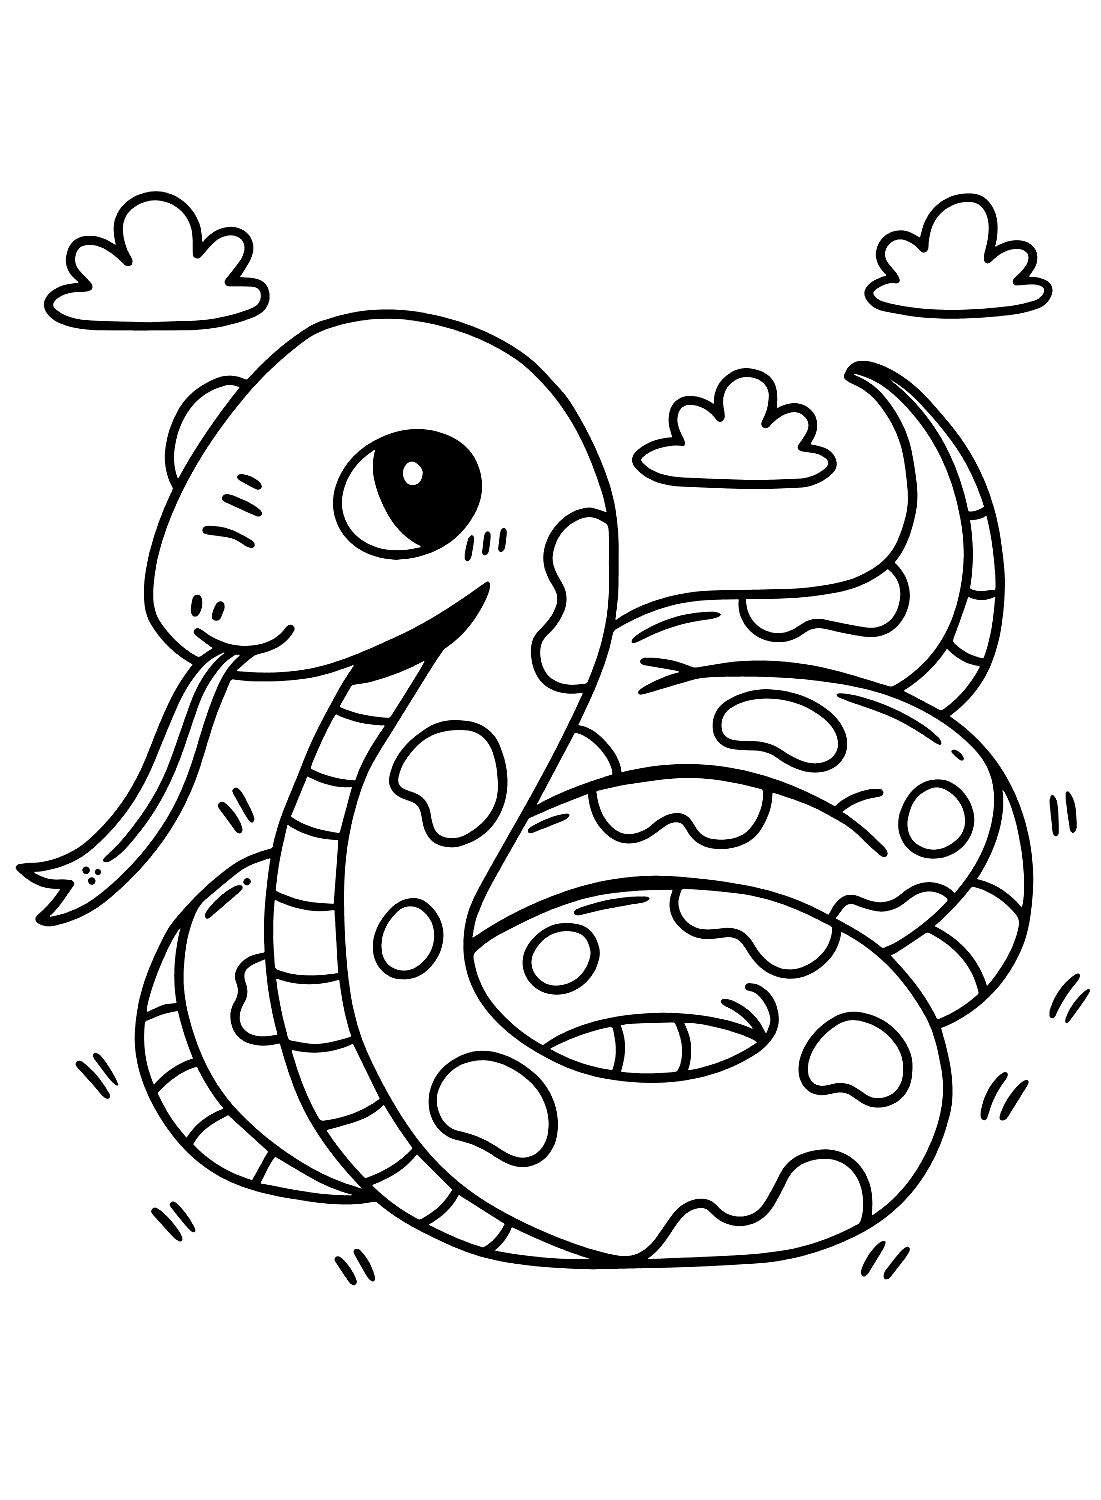 Free snake coloring pages